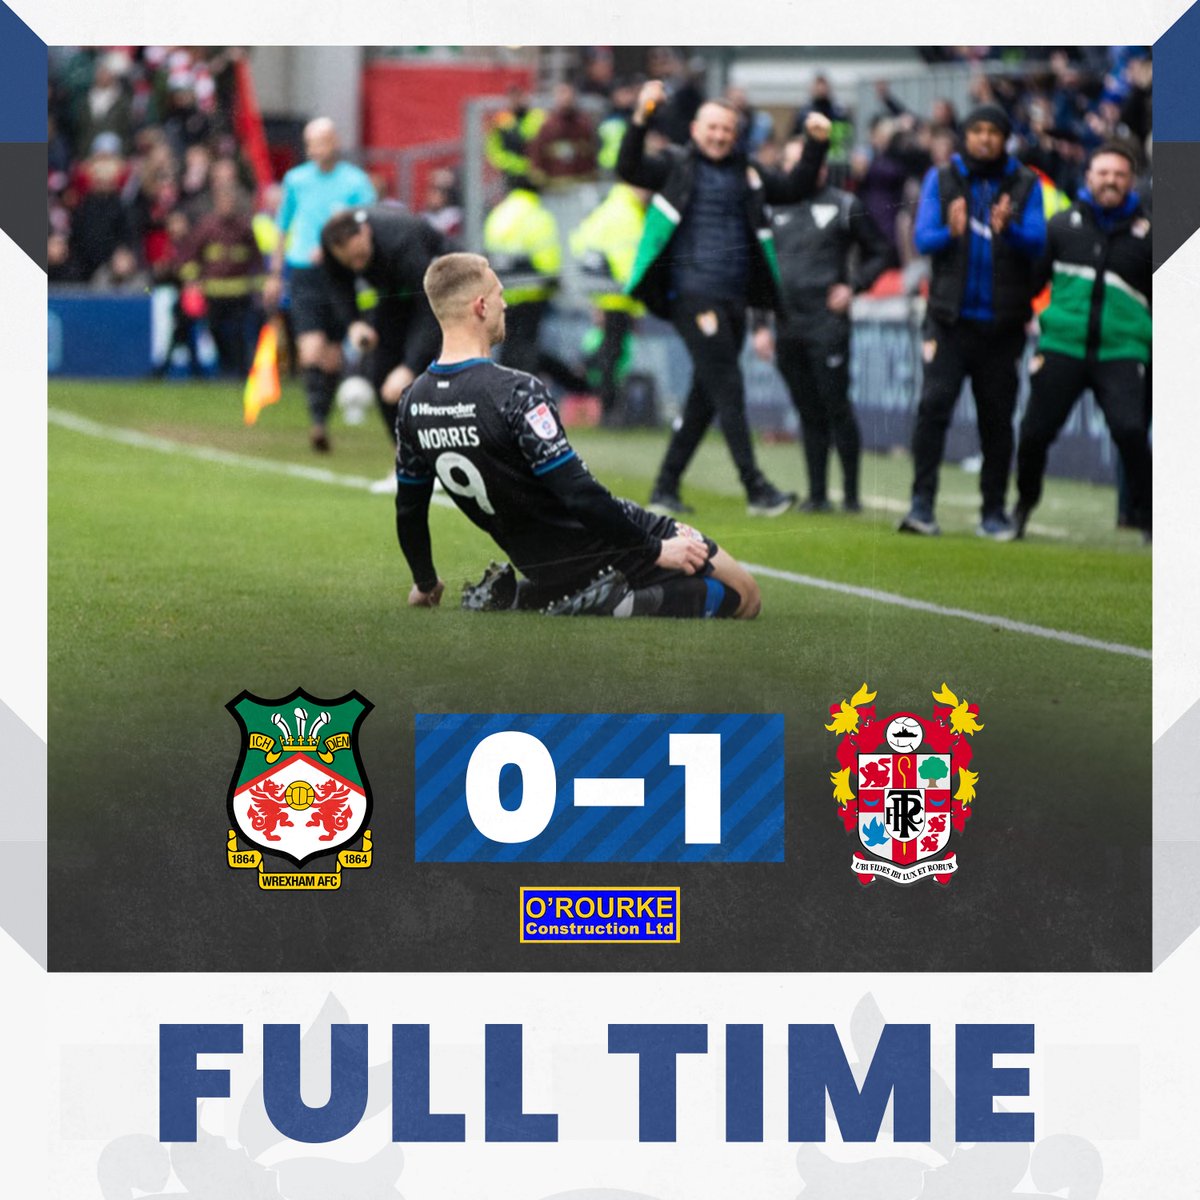 VICTORY IN WREXHAM! #TRFC #SWA